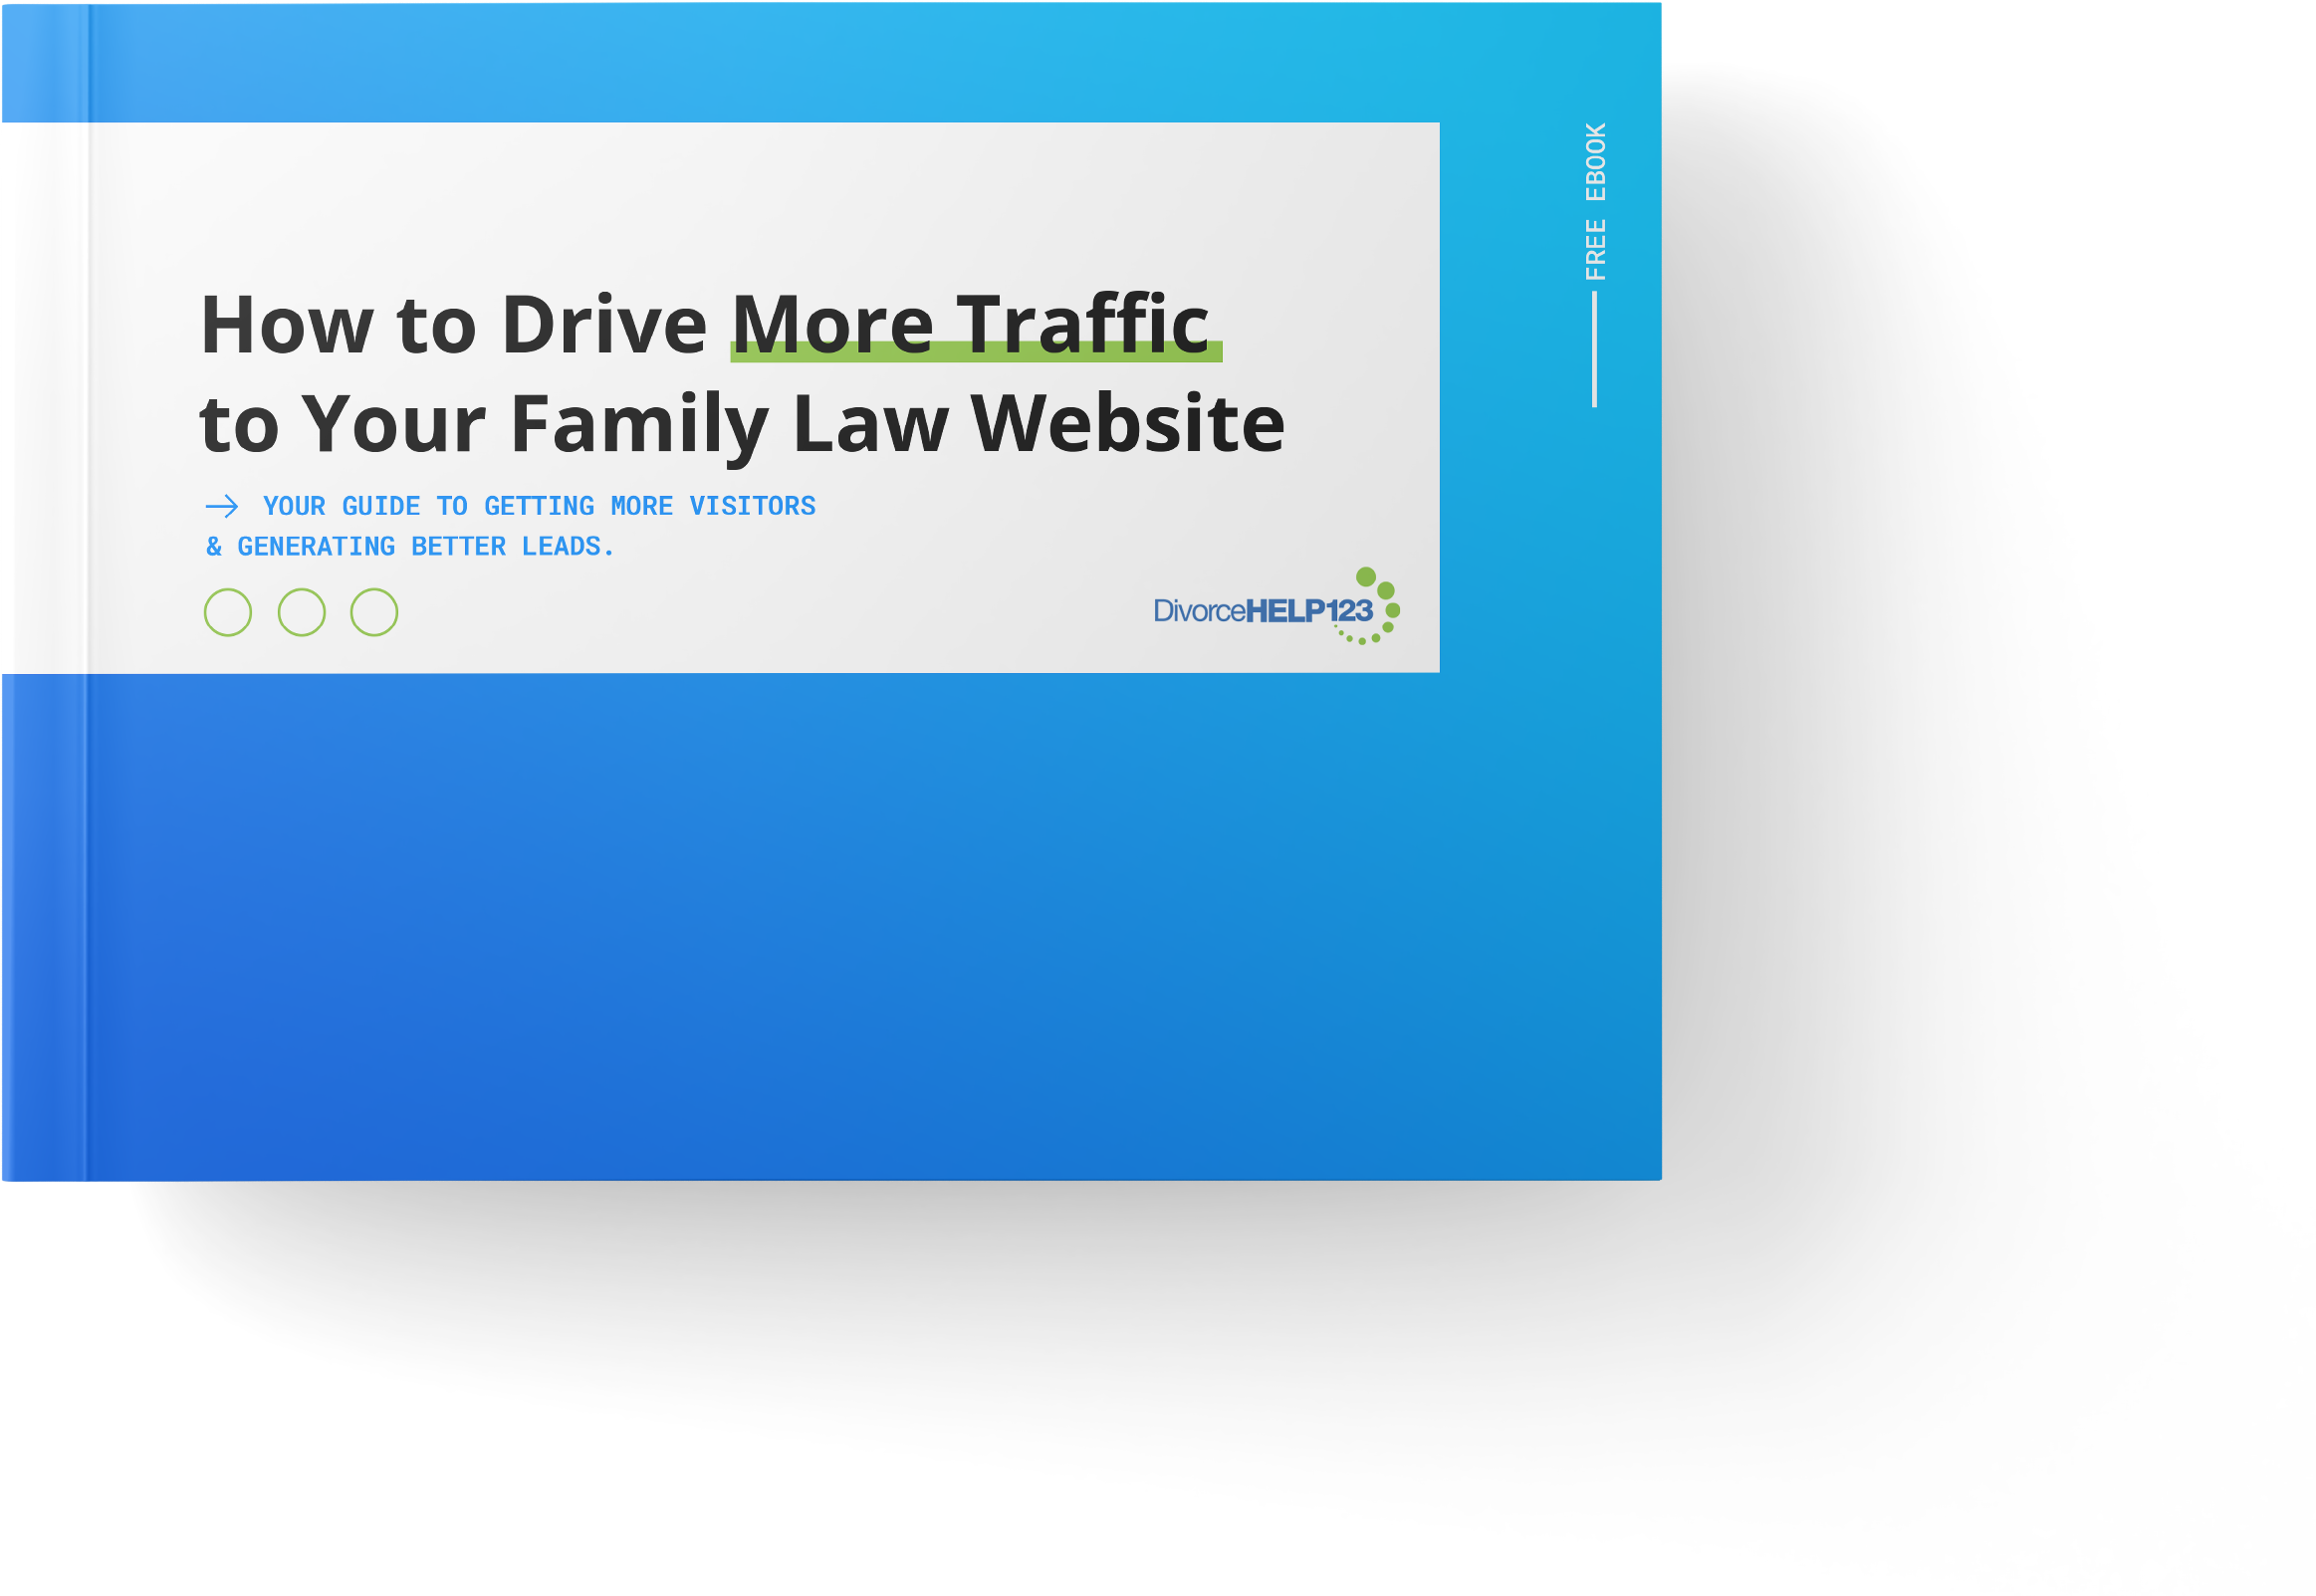 How to Drive More Traffic to Your Legal Website